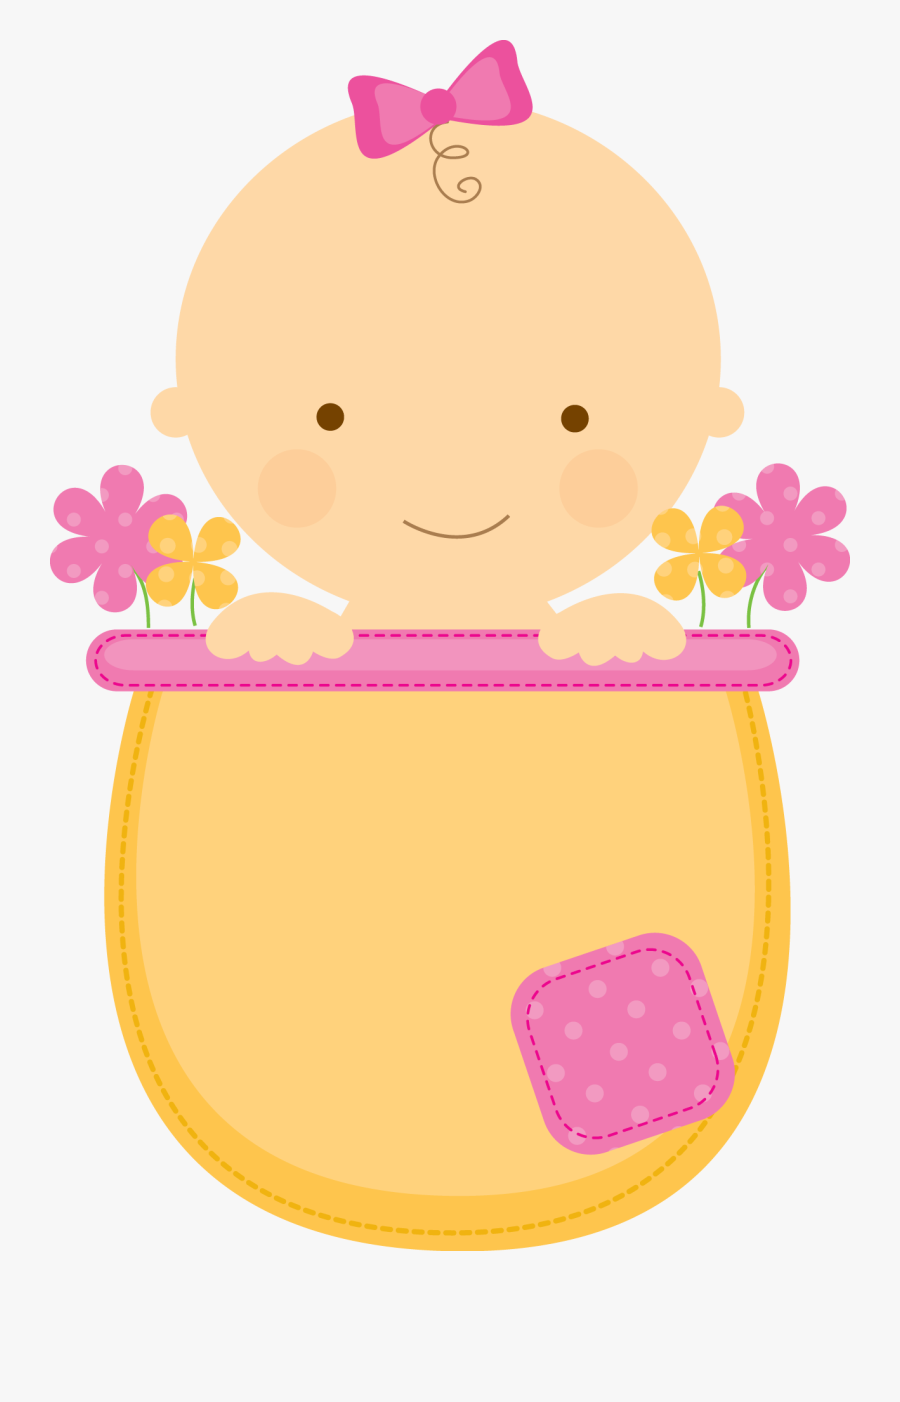 Clip Art Gender Neutral Baby Clipart - Baby Shower Clipart Png, Transparent Clipart